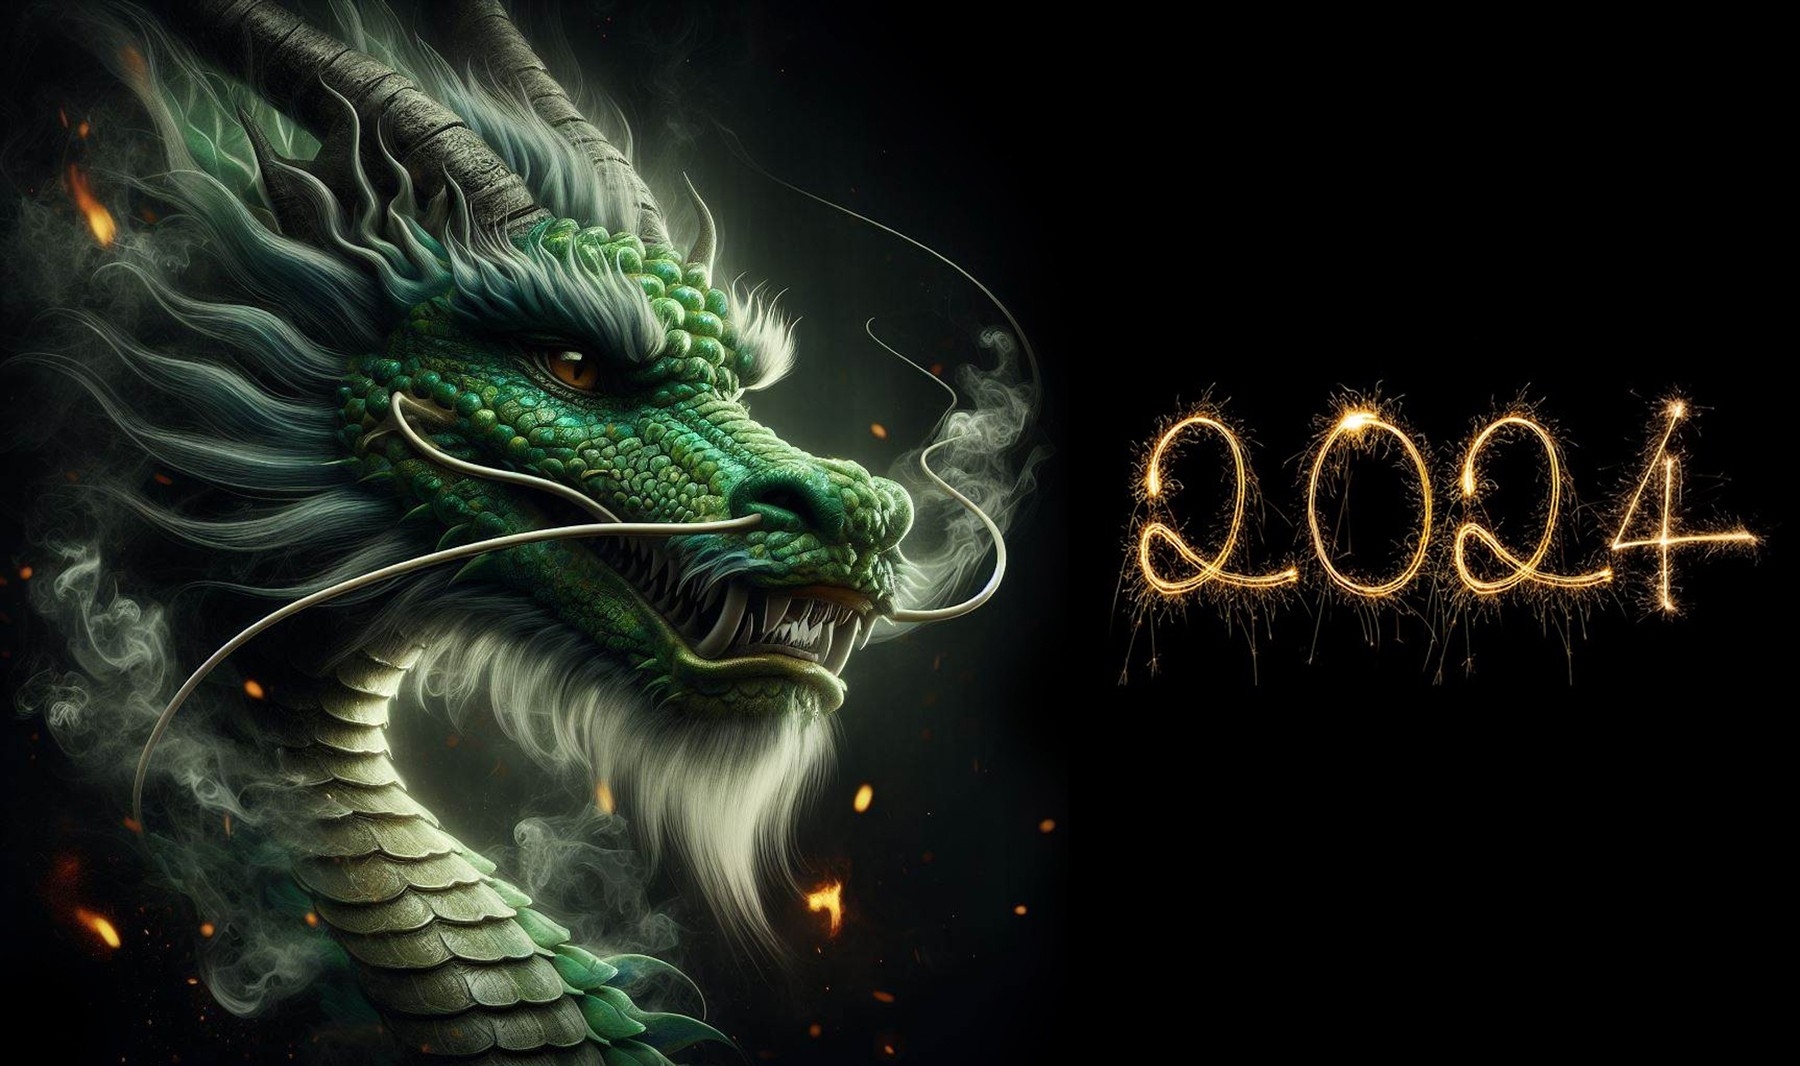 In the Year of the Green Dragon, thrive in outdoor advertising!